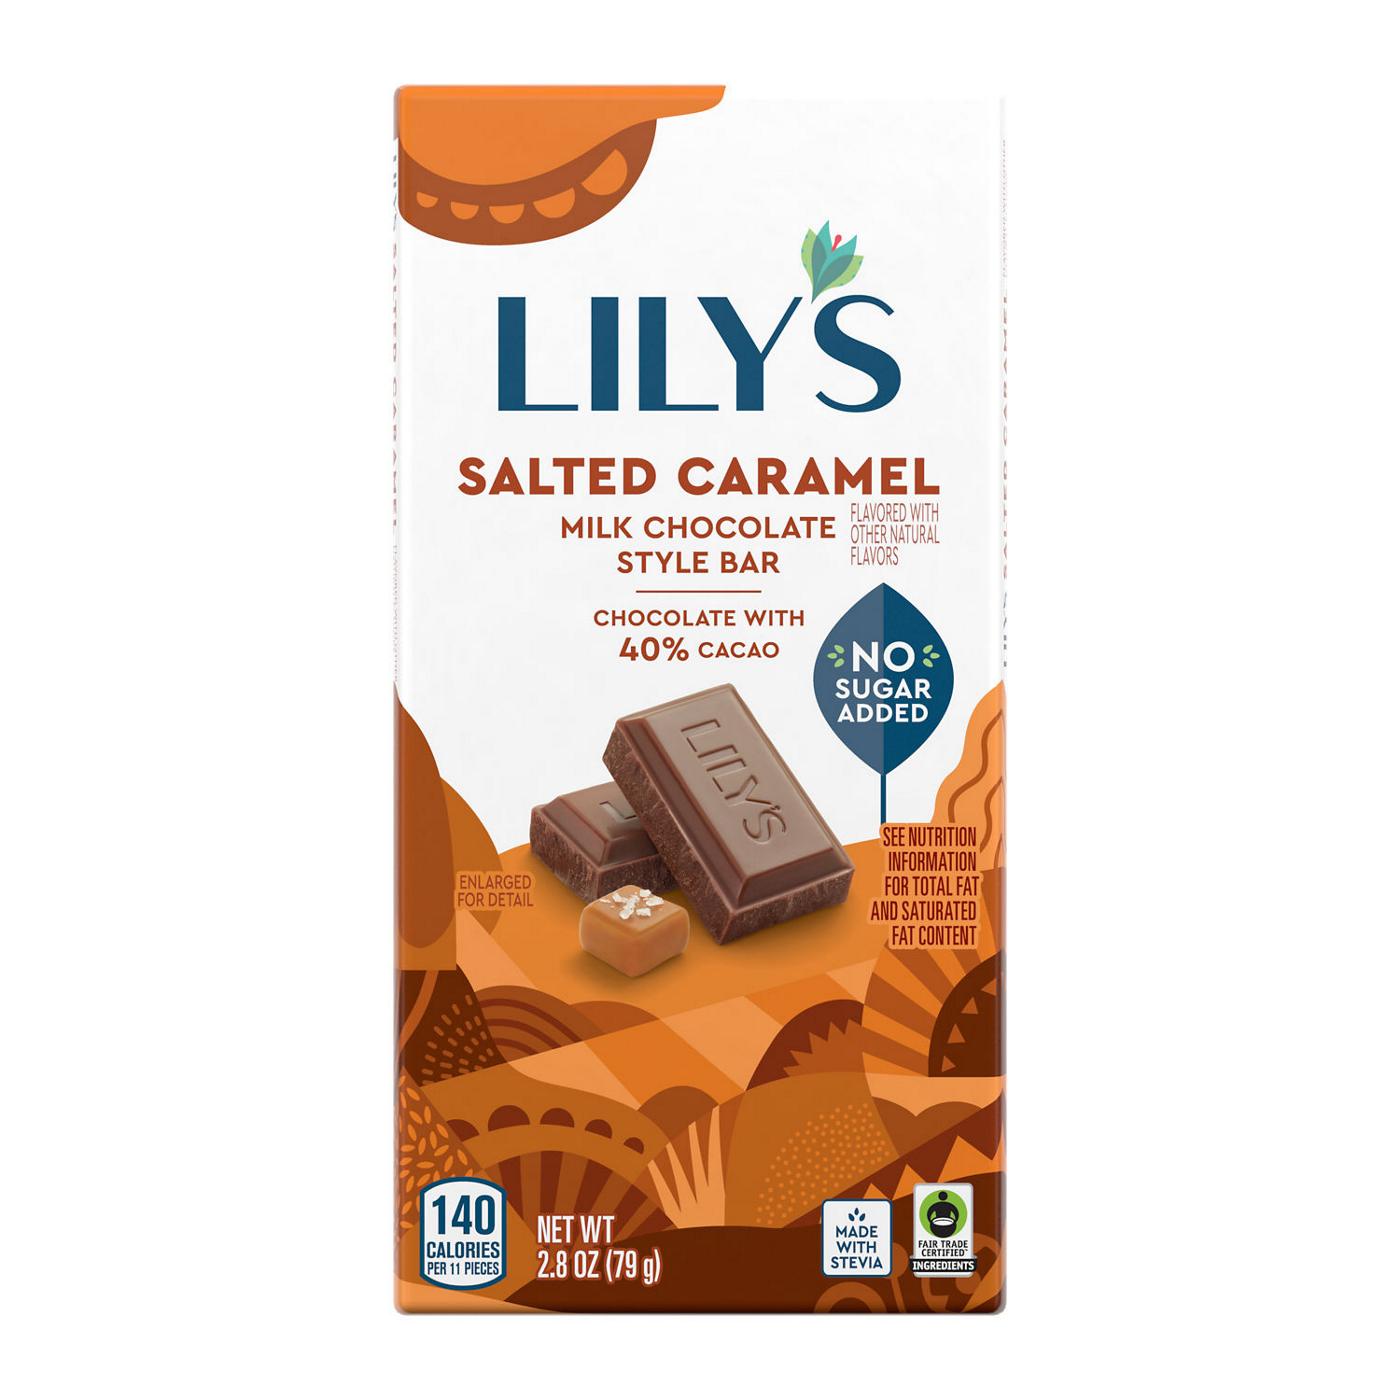 Lily's Salted Caramel Milk Chocolate Style Bar; image 1 of 7